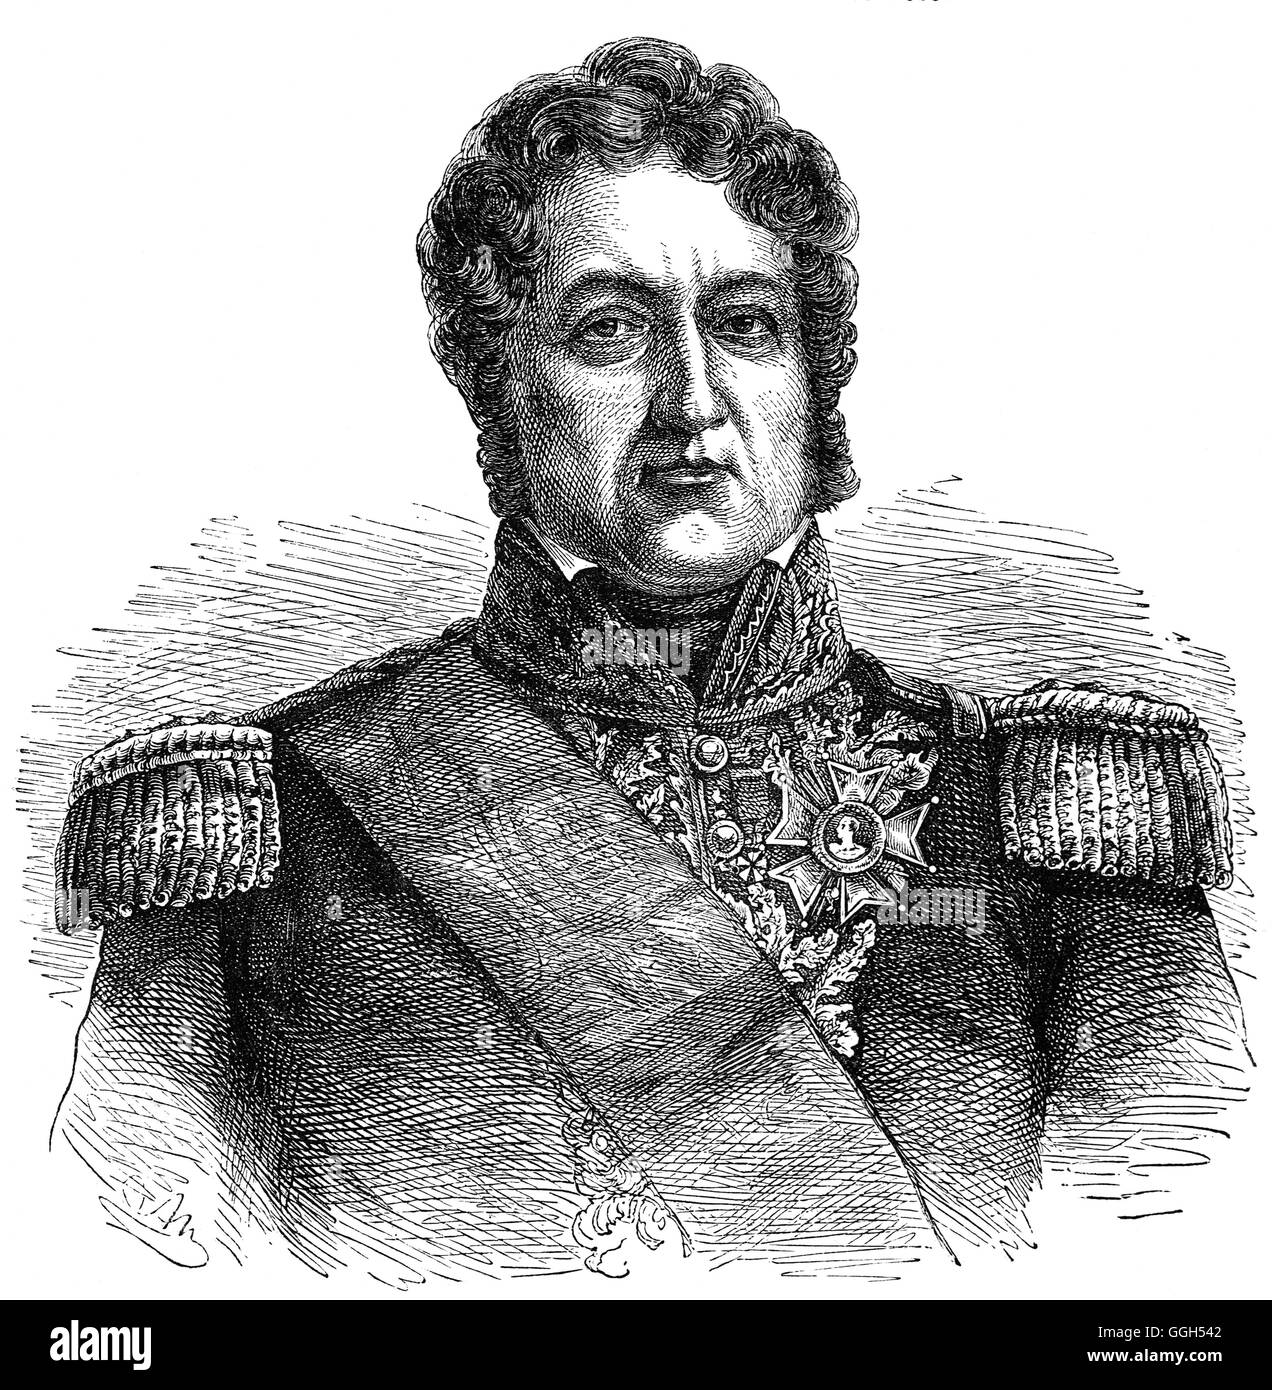 Louis Philippe I (1773 – 1850) was King of France from 1830 to 1848 as the leader of the Orléanist party. He was a cousin of King Louis XVI of France and had earlier found it necessary to flee France during the period of the French Revolution in order to avoid imprisonment and execution. After 21 years in exile he was proclaimed king in 1830 after his cousin Charles X was forced to abdicate in the wake of the events of the July Revolution of that year. Stock Photo